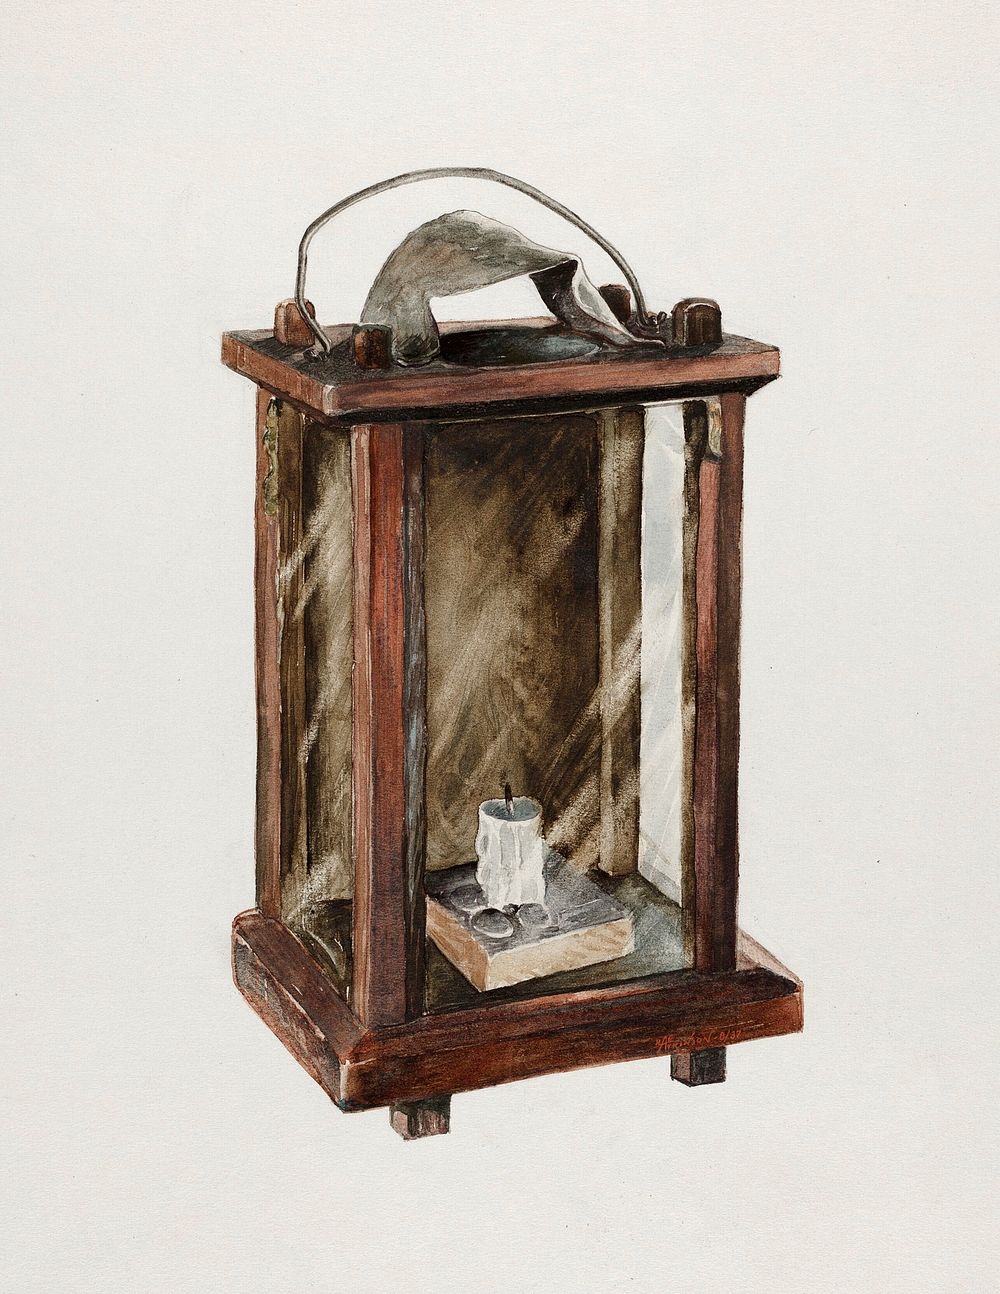 Lantern (ca.1937) by Ralph Atkinson. Original from The National Gallery of Art. Digitally enhanced by rawpixel.